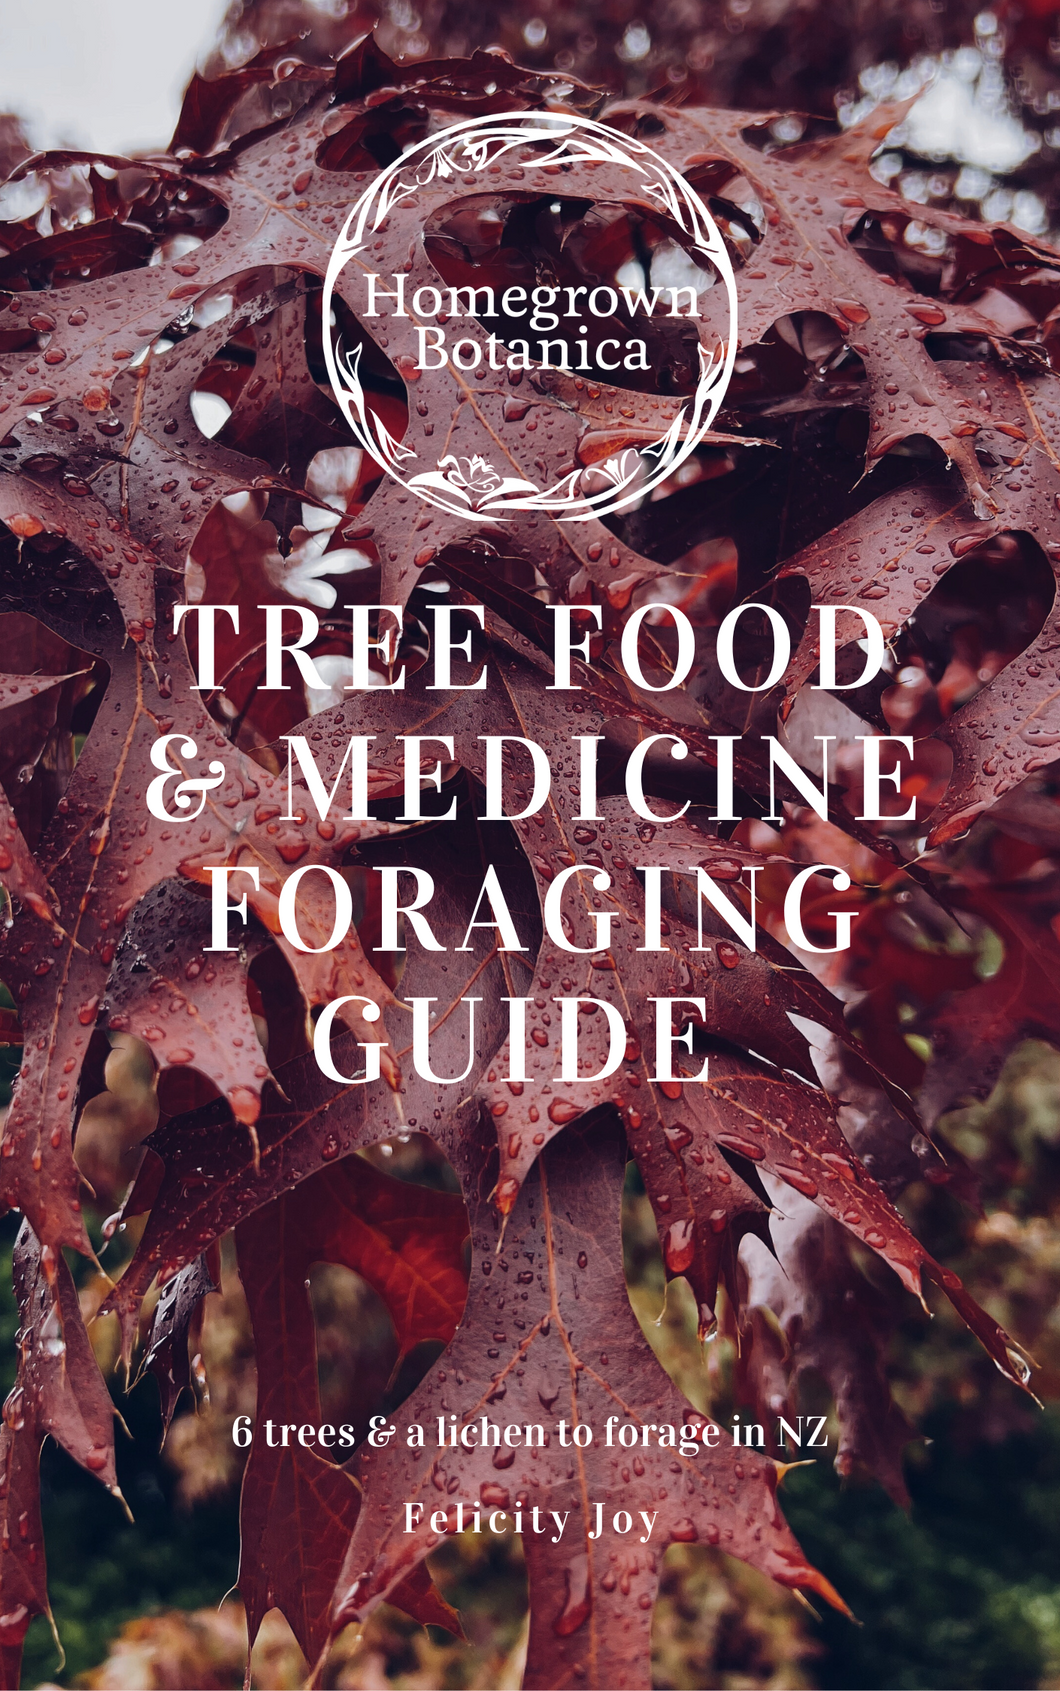 Tree Food and Medicine Foraging Guide cover showing Oak leaves